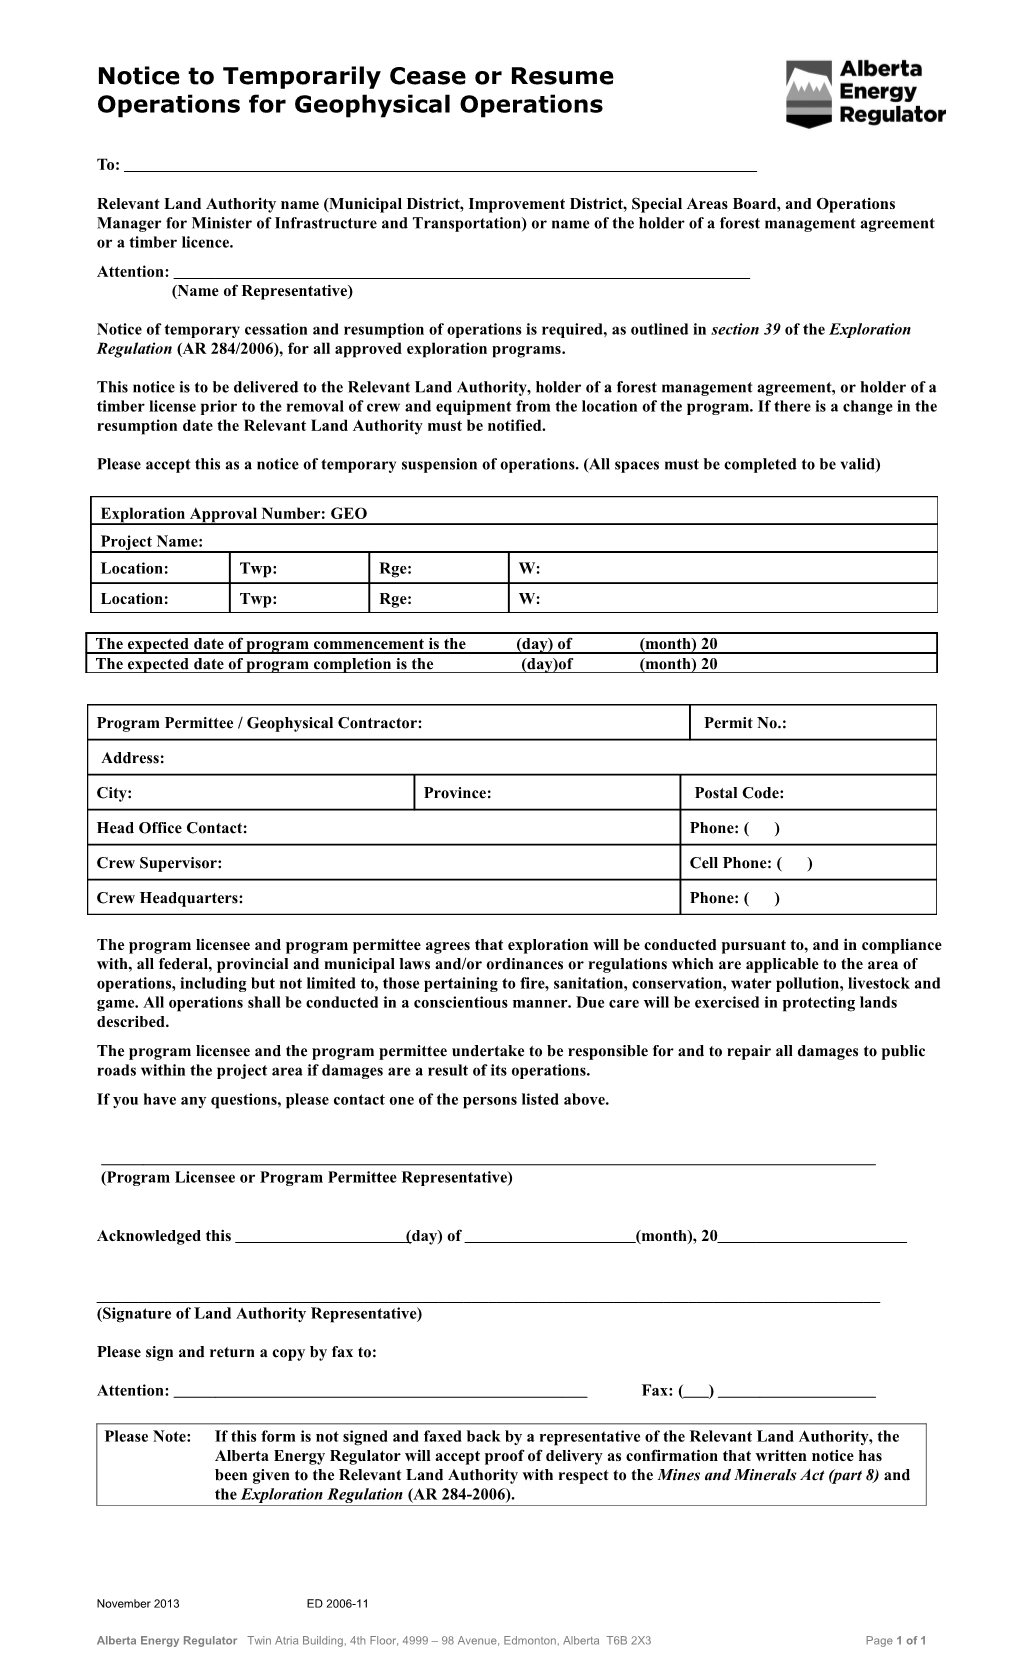 ED2006-11 Form Notice to Temporairly Cease Or Resume Operations for Geophysical Operations